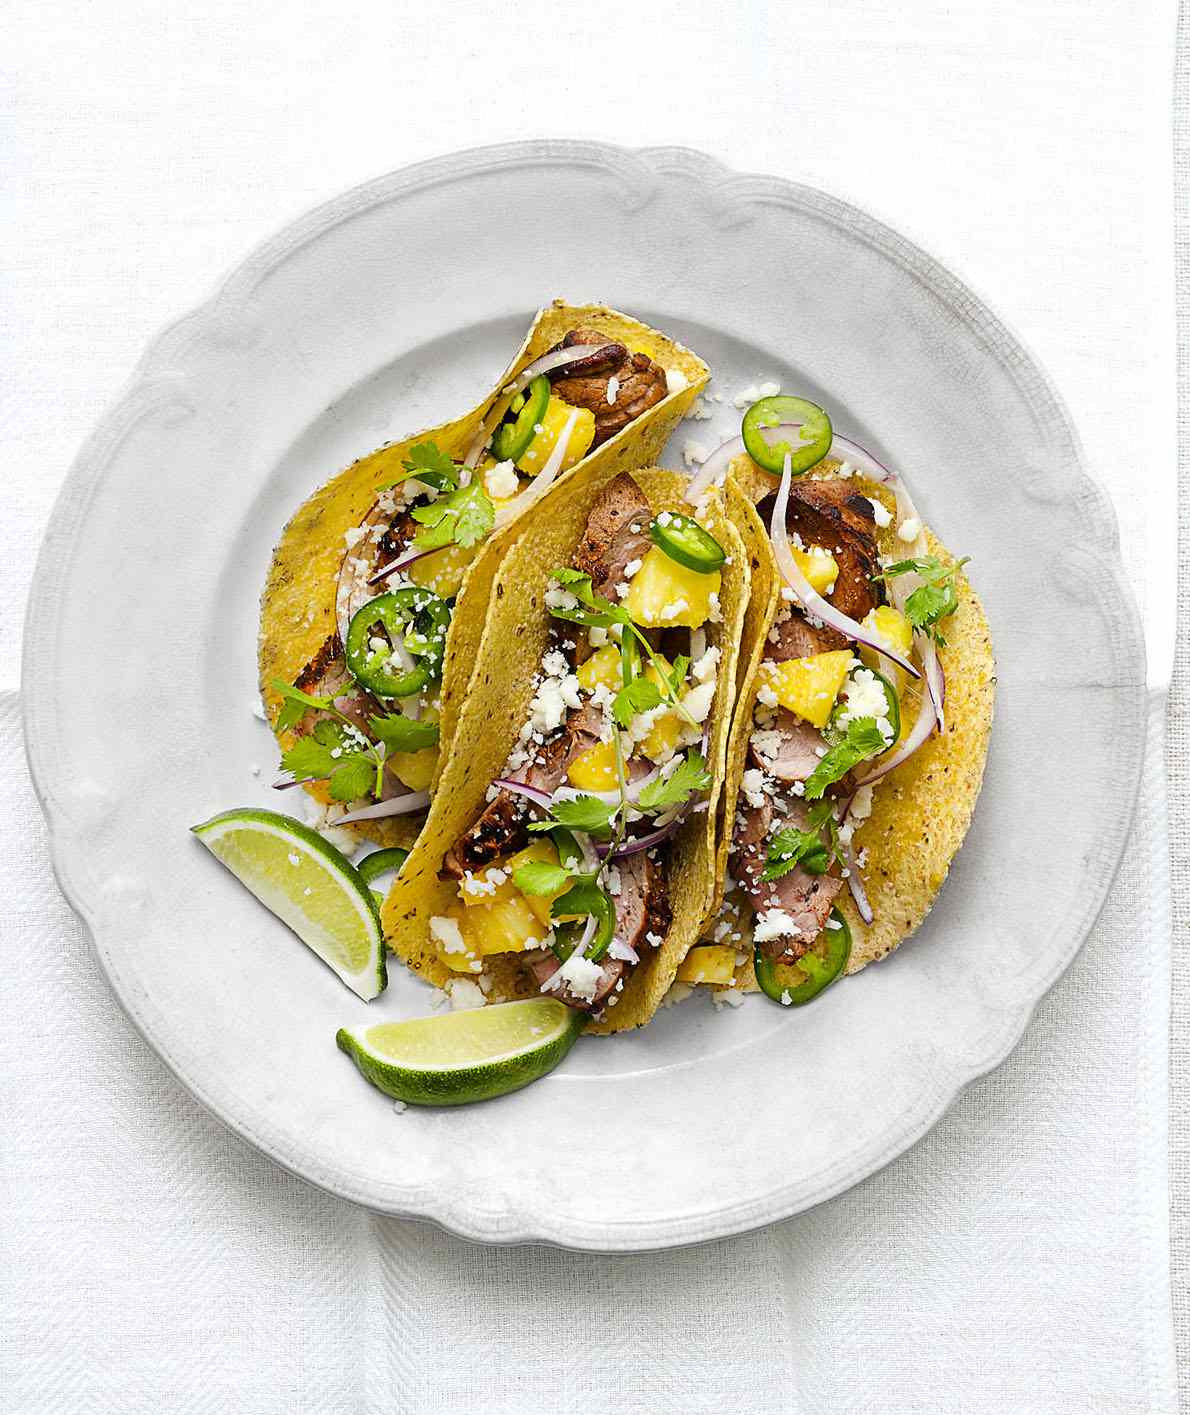 Pork and Pineapple Tacos 